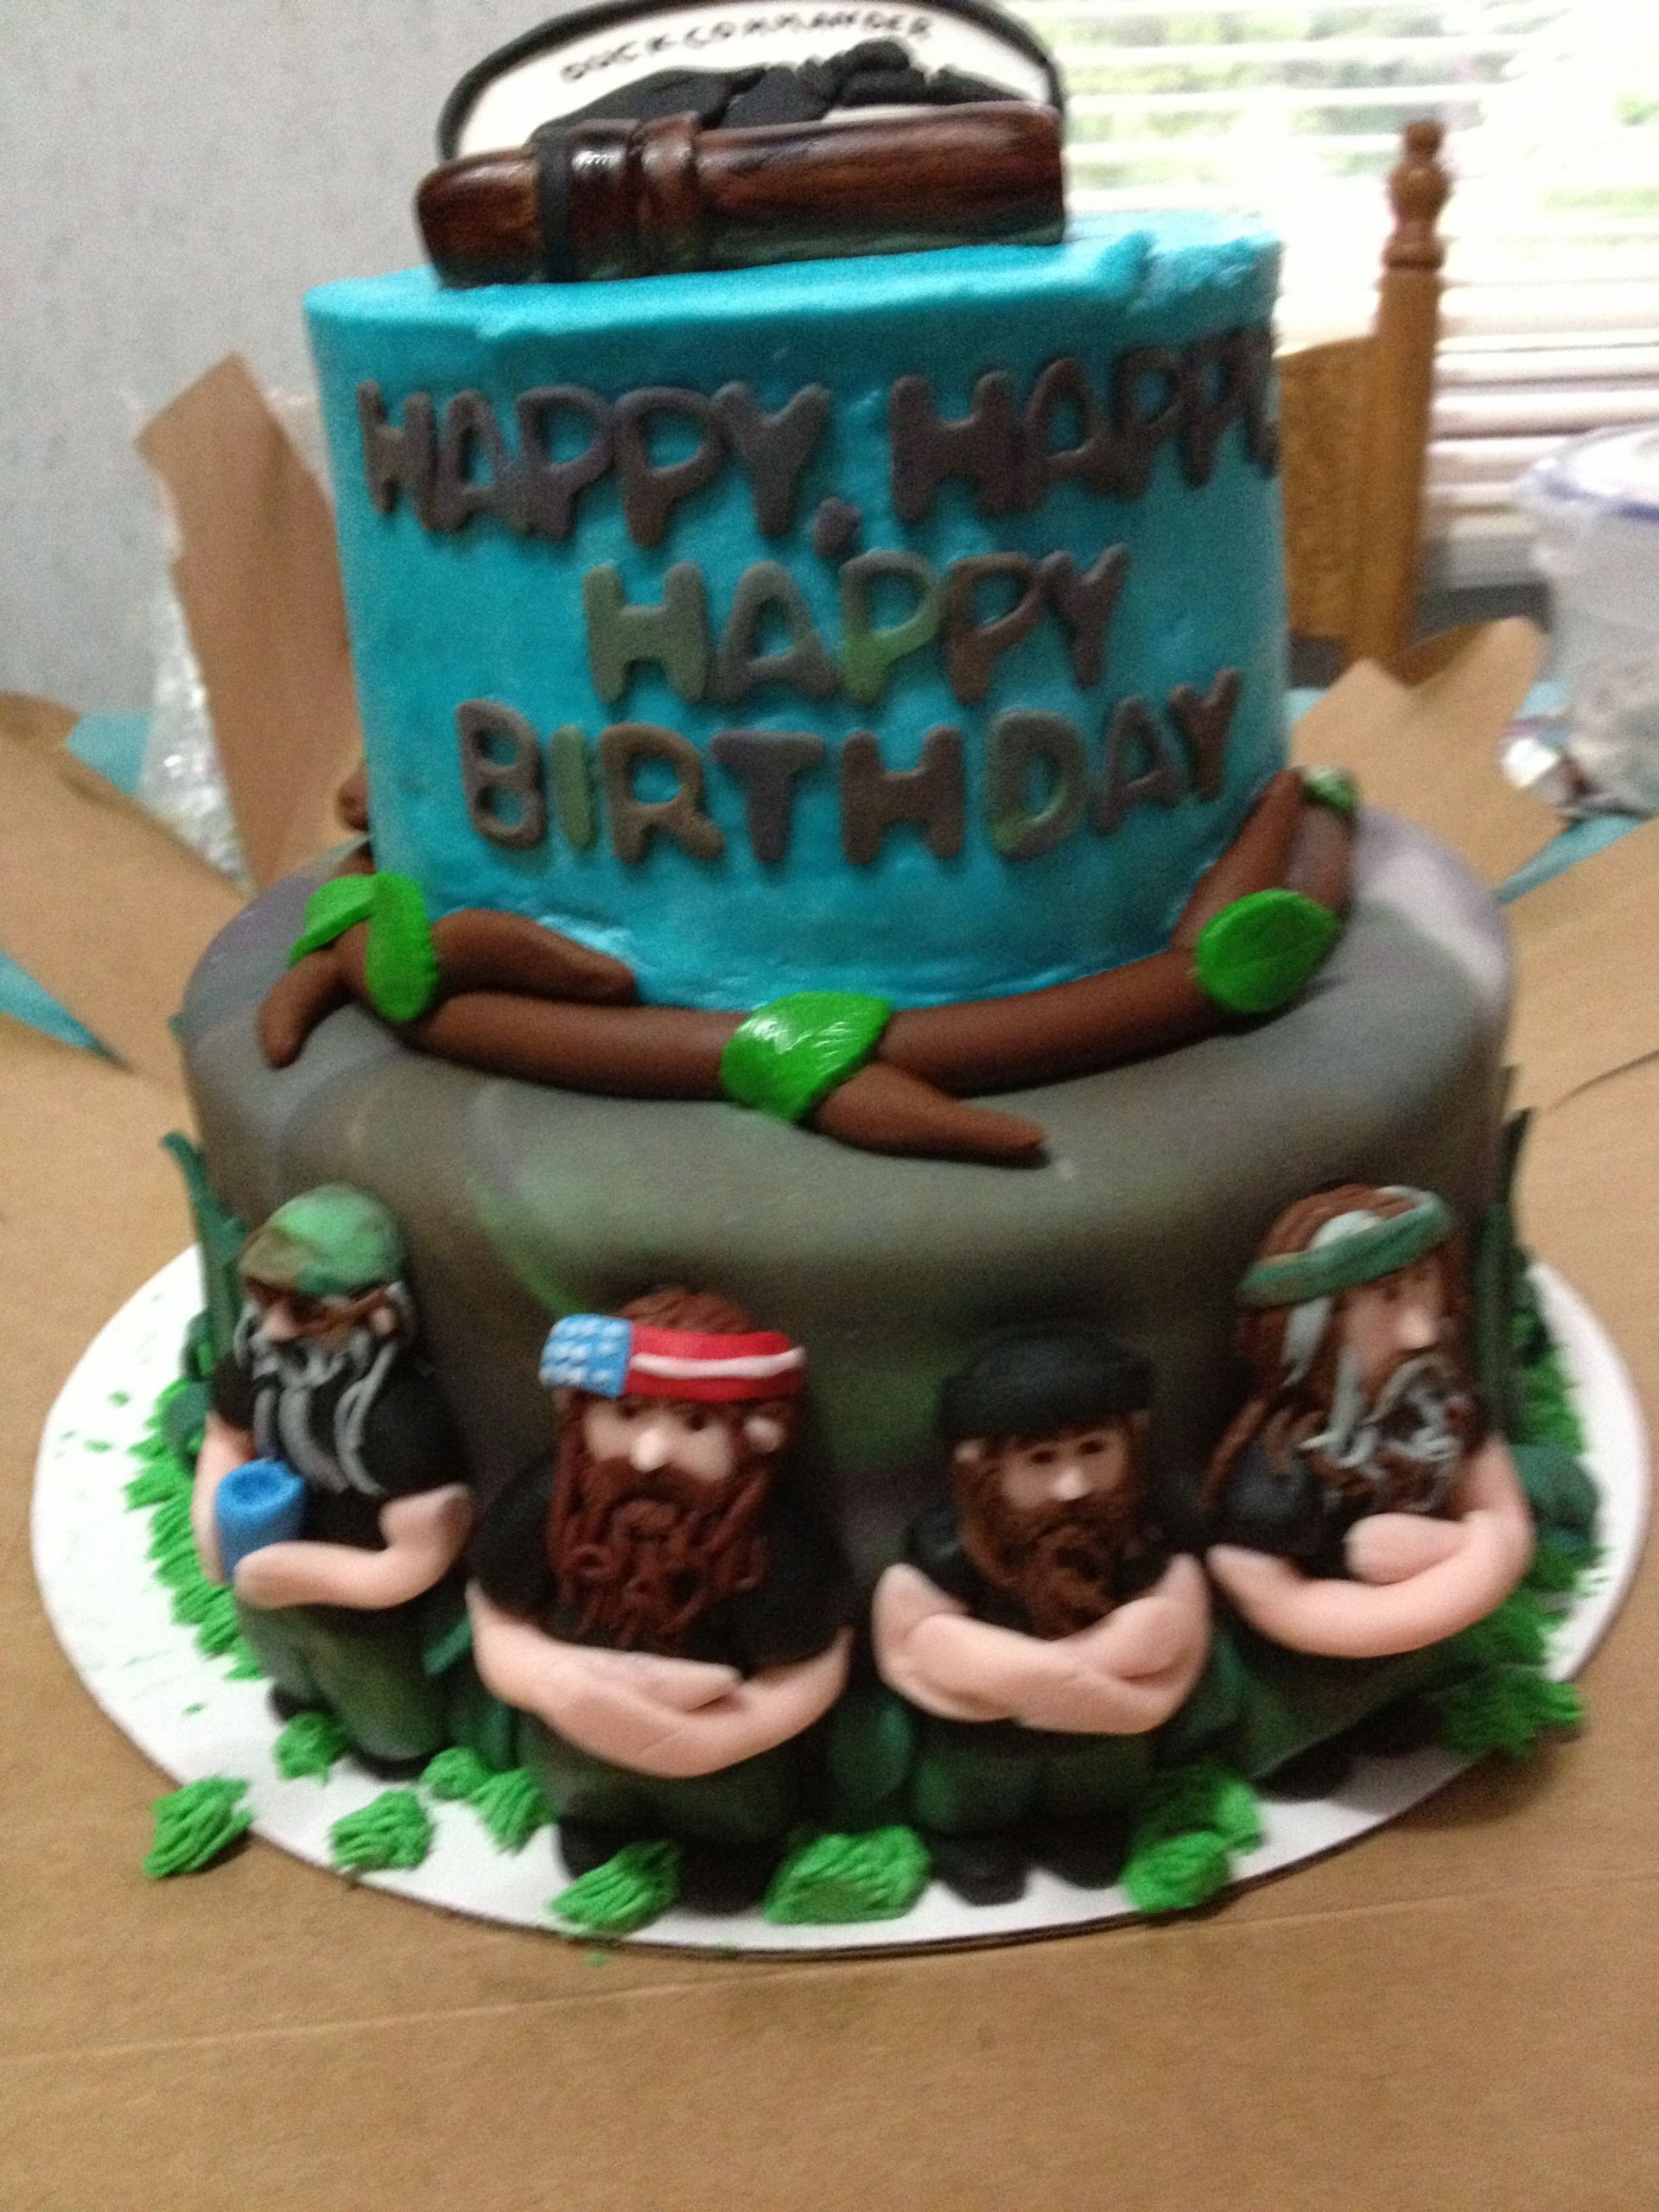 Duck Dynasty Birthday Cake
 Celebrated Mother s 39th birthday with a duck dynasty cake